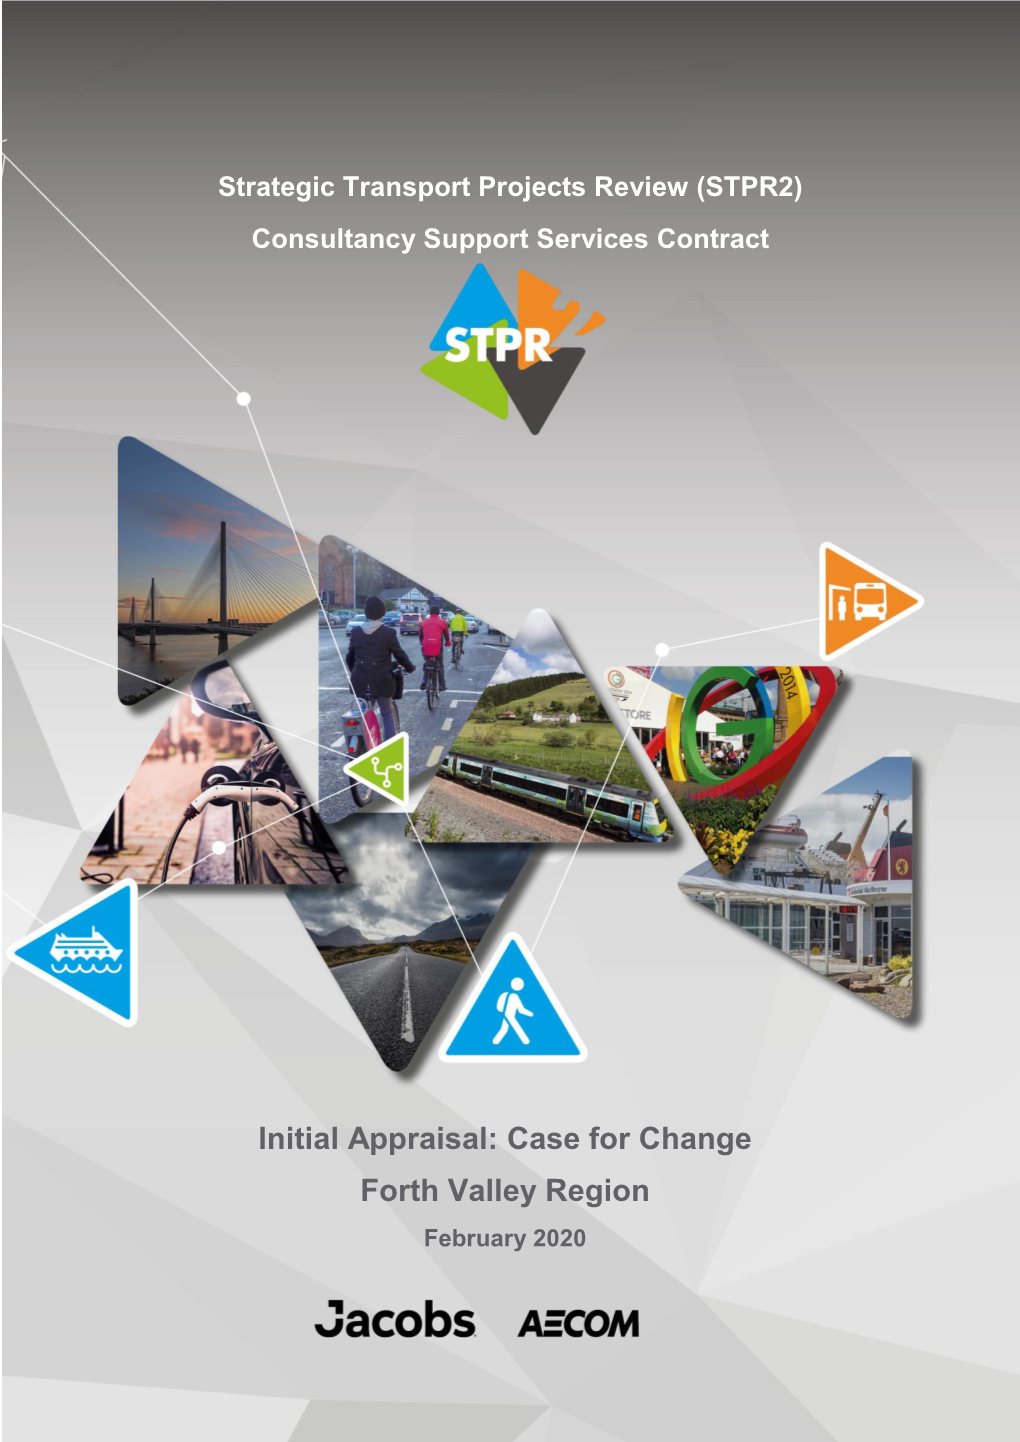 Case for Change Forth Valley Region February 2020 STPR2: Initial Appraisal: Case for Change - Forth Valley Region